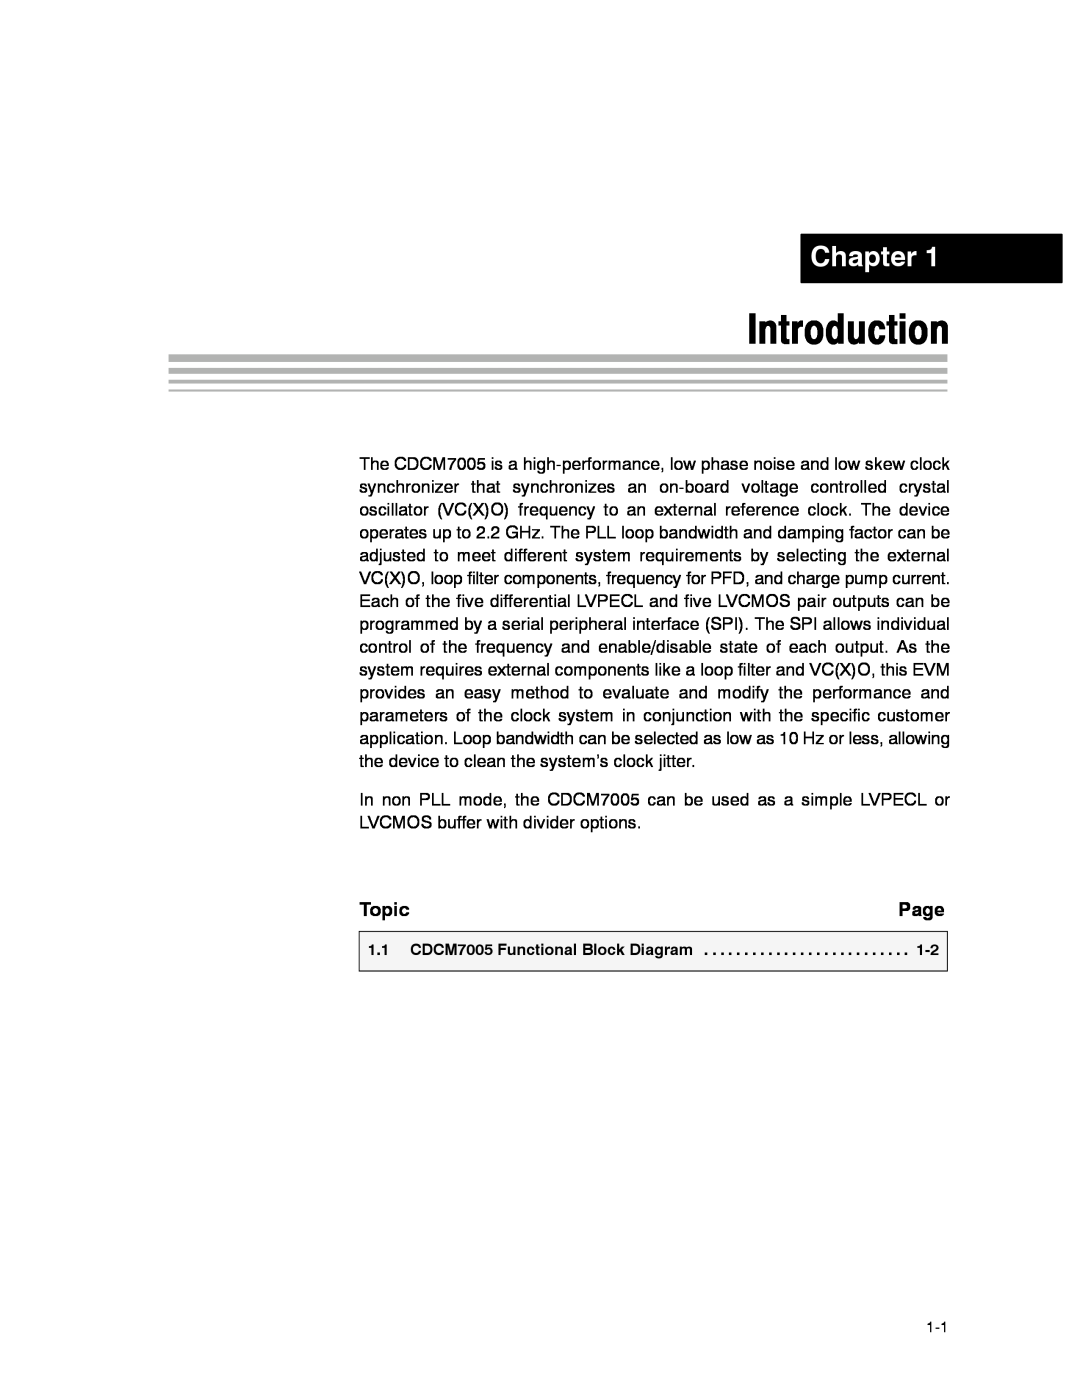 Texas Instruments CDCM7005 manual Introduction, Chapter, Topic, Page 